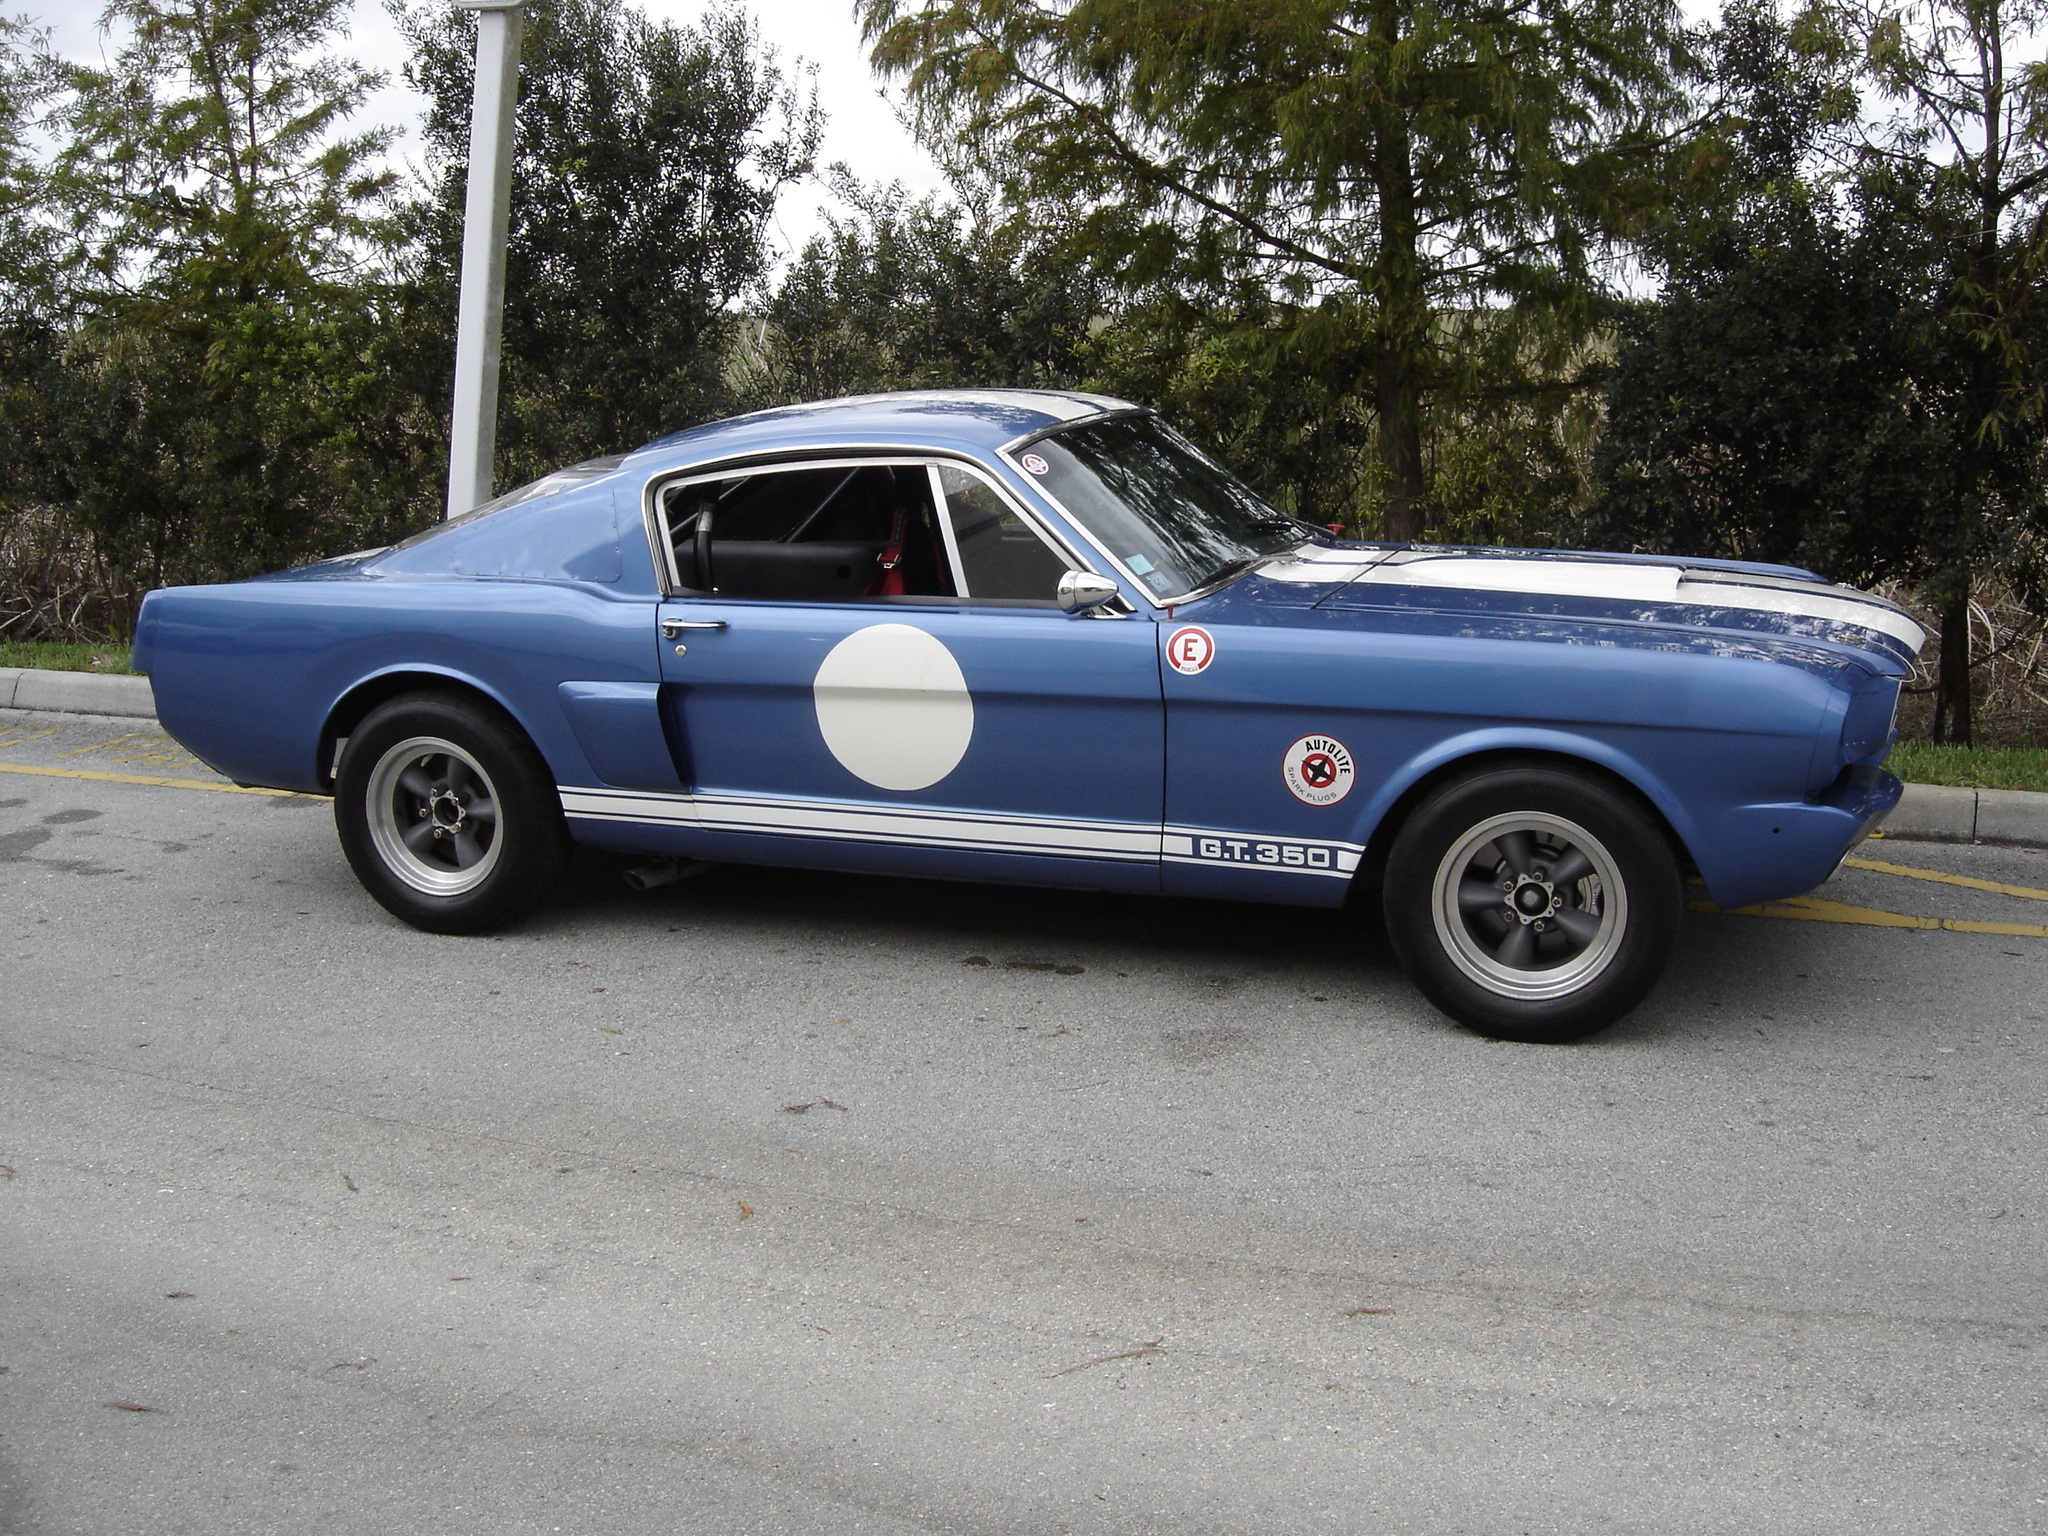  Wallpapers  Desktop on Cars Road 1967 Race Ford Mustang Shelby Gt350 Fastback 1965 1966 Gt